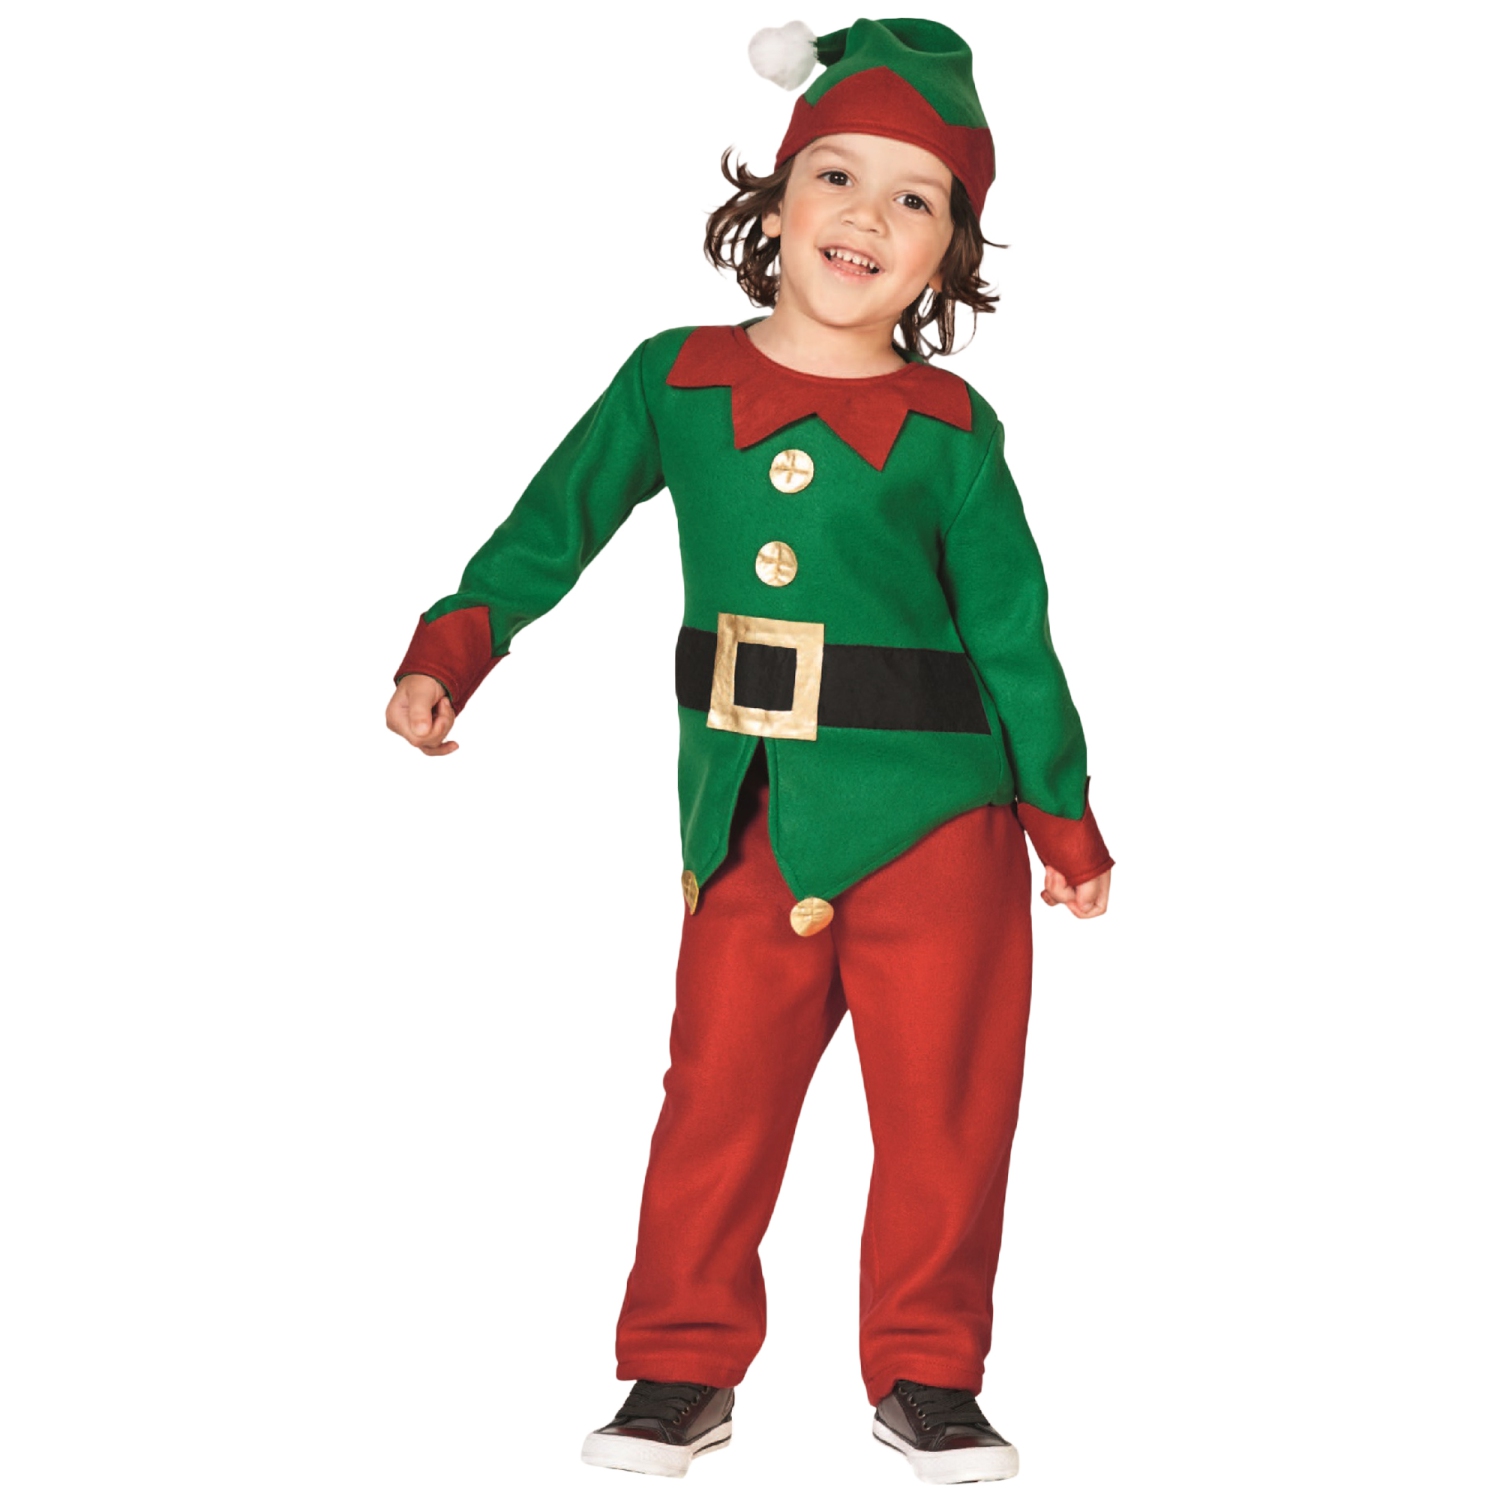 24" Red and Green Elf Boy's Costume With a Christmas Santa Hat - 4-6 Years